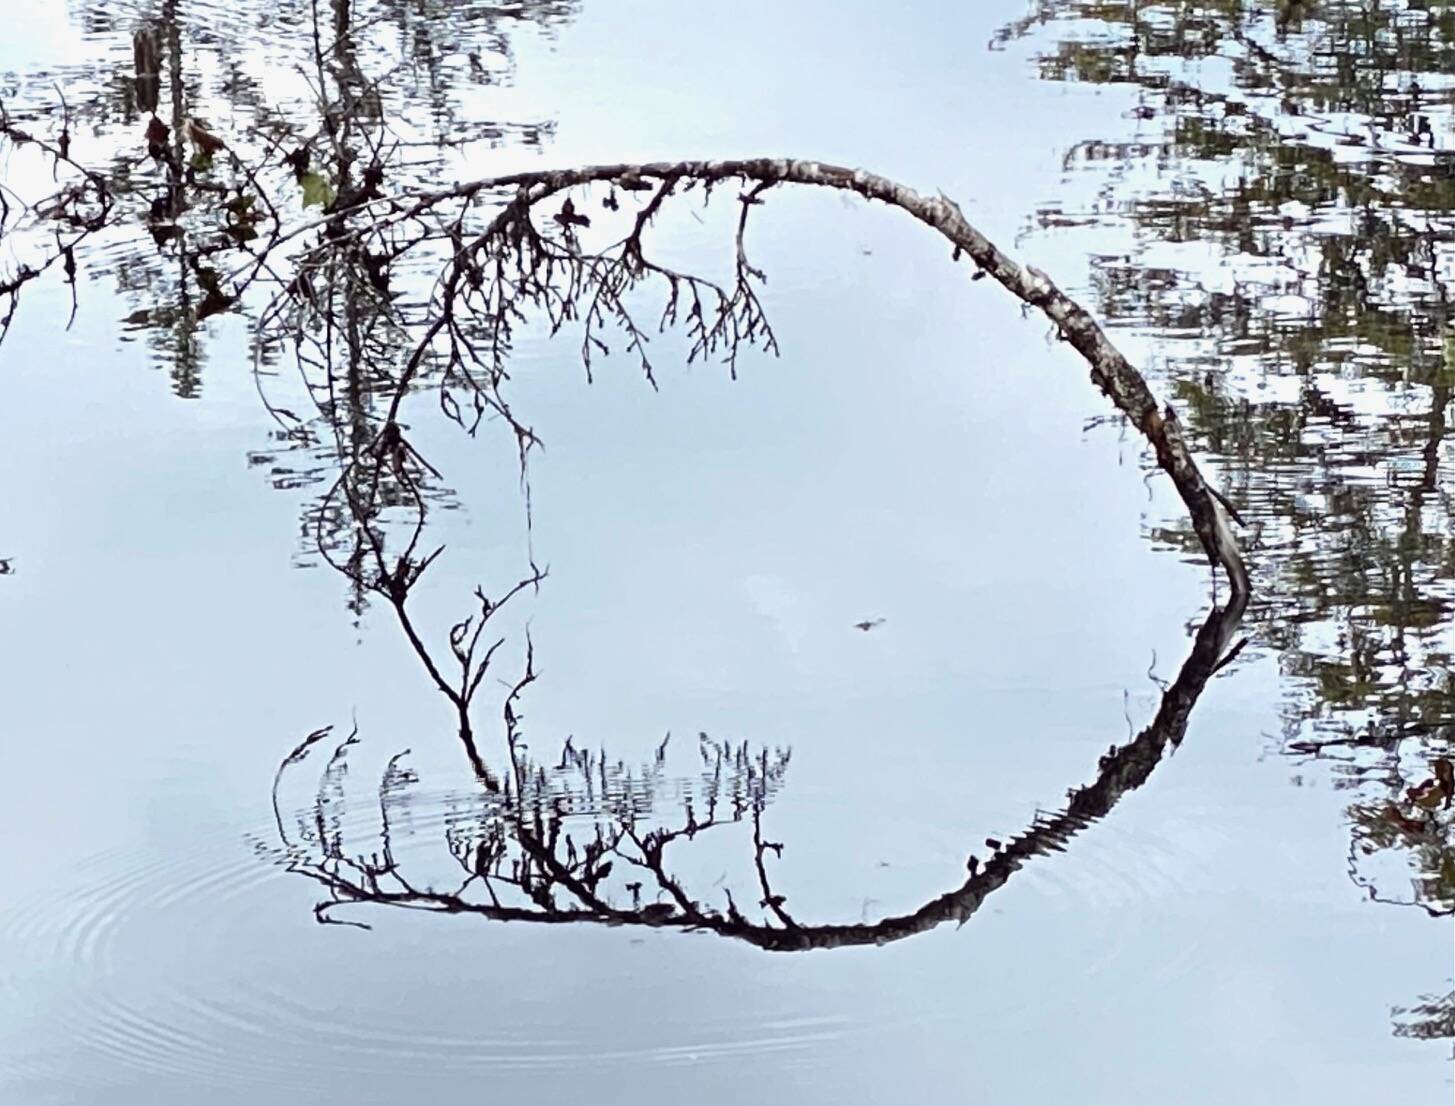 Branch reflection in a slough at Point Bridget State Park on Aug. 16. (Photo by Denise Carroll)